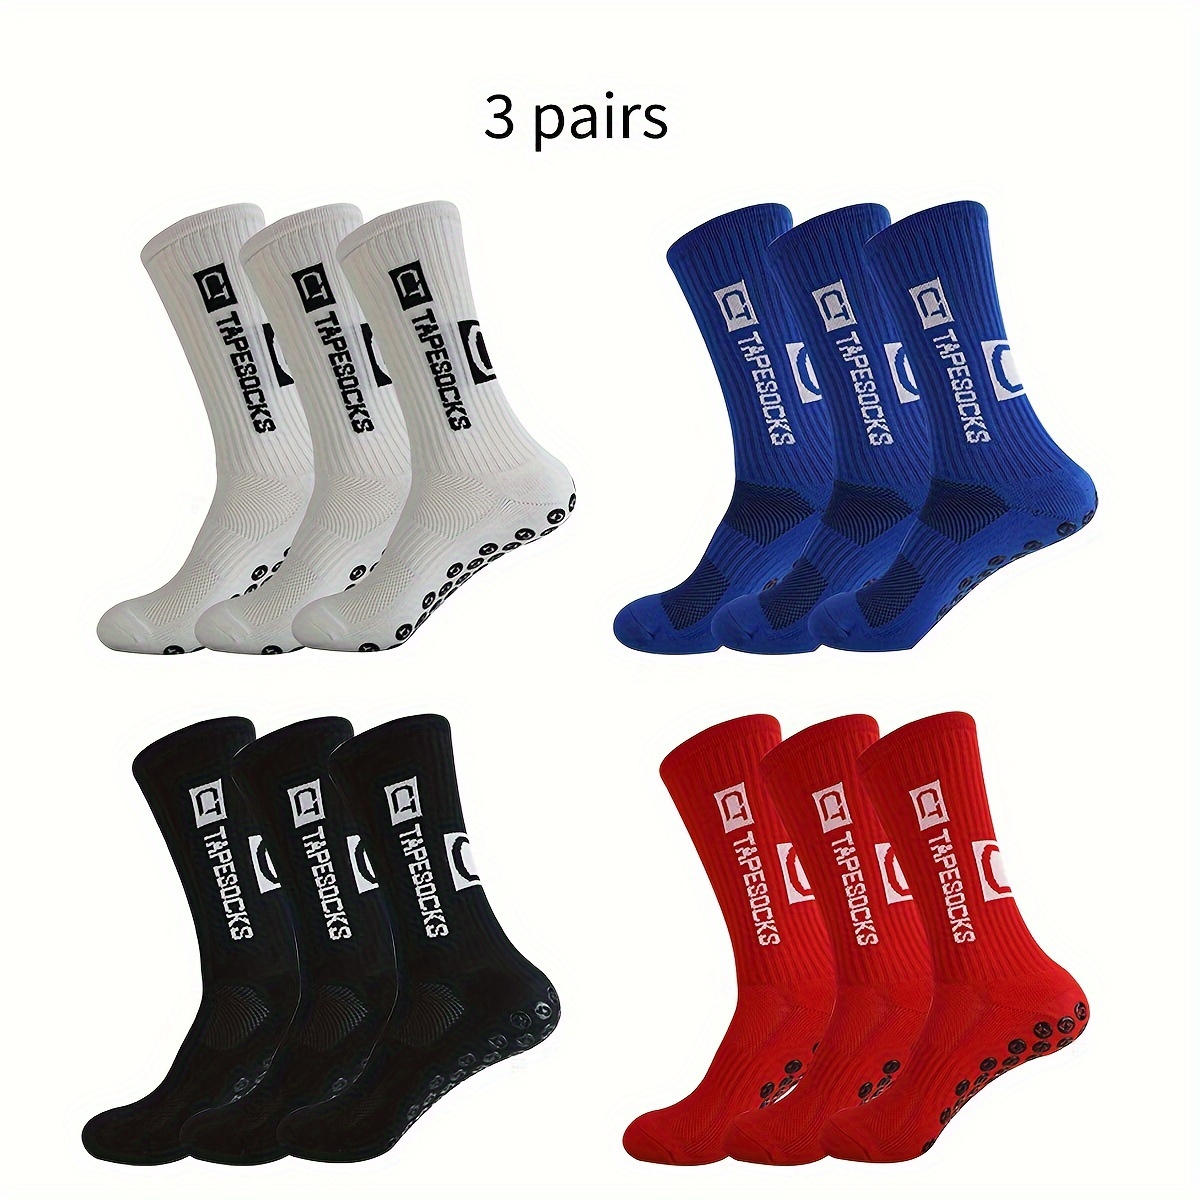 

3 Pairs Of Men's Anti Odor & Sweat Absorption Non-slip Sport Crew Socks, Comfy & Breathable Socks, For Daily & Outdoor Wearing, Spring And Summer